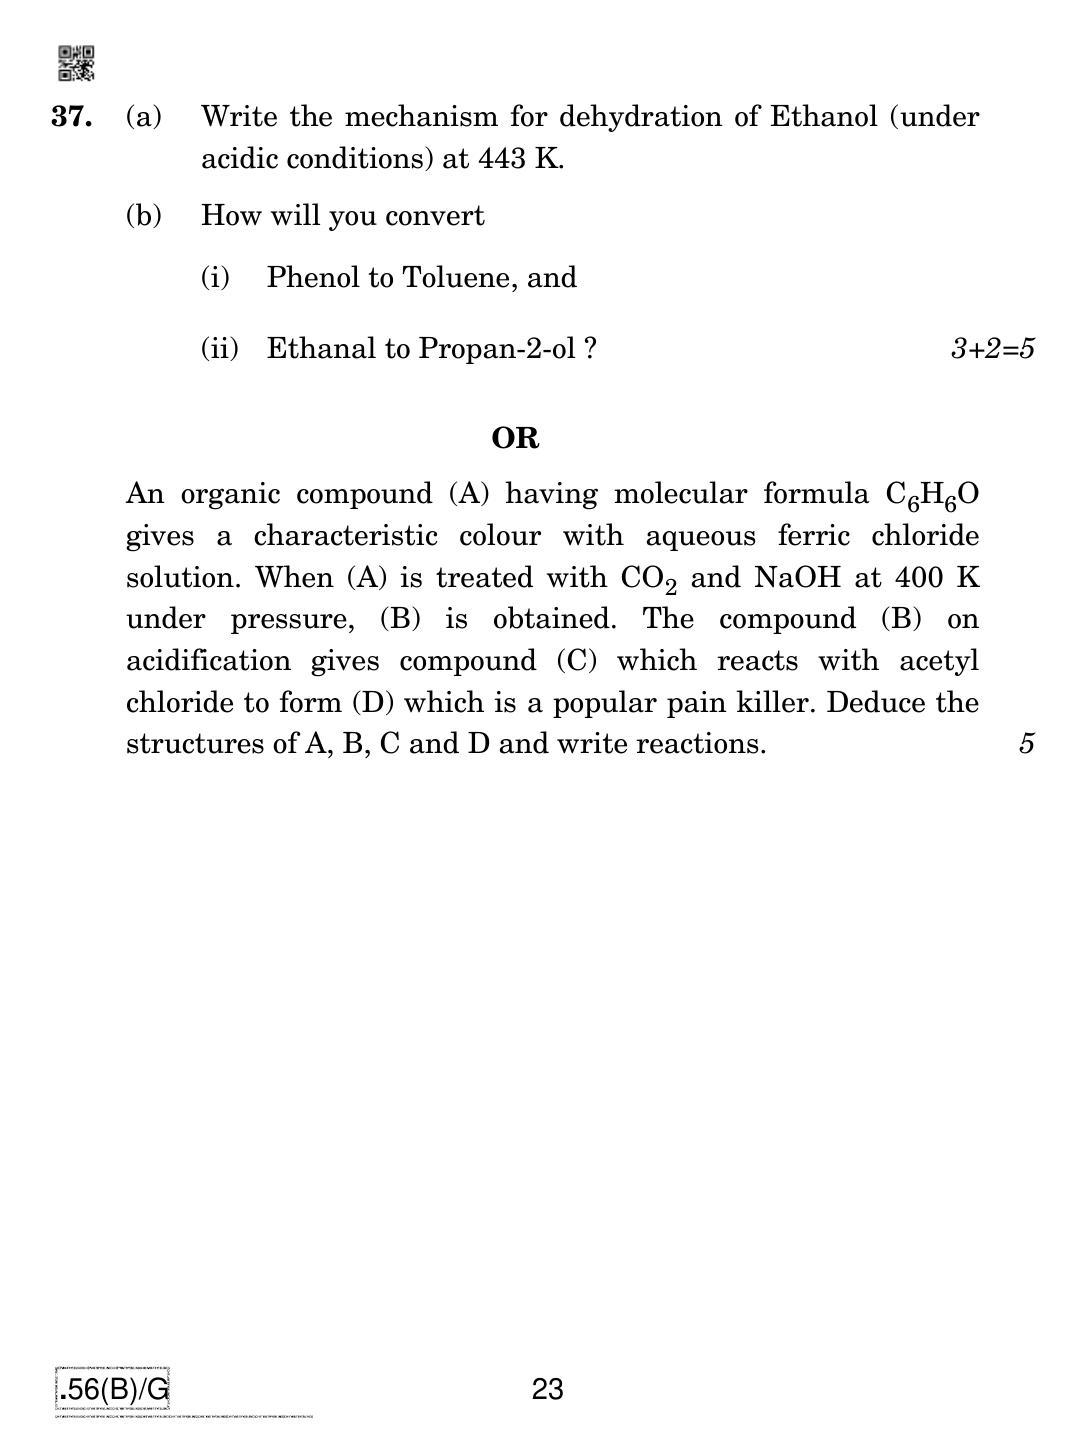 CBSE Class 12 56(B)-C - Chemistry For Blind Candidates 2020 Compartment Question Paper - Page 23